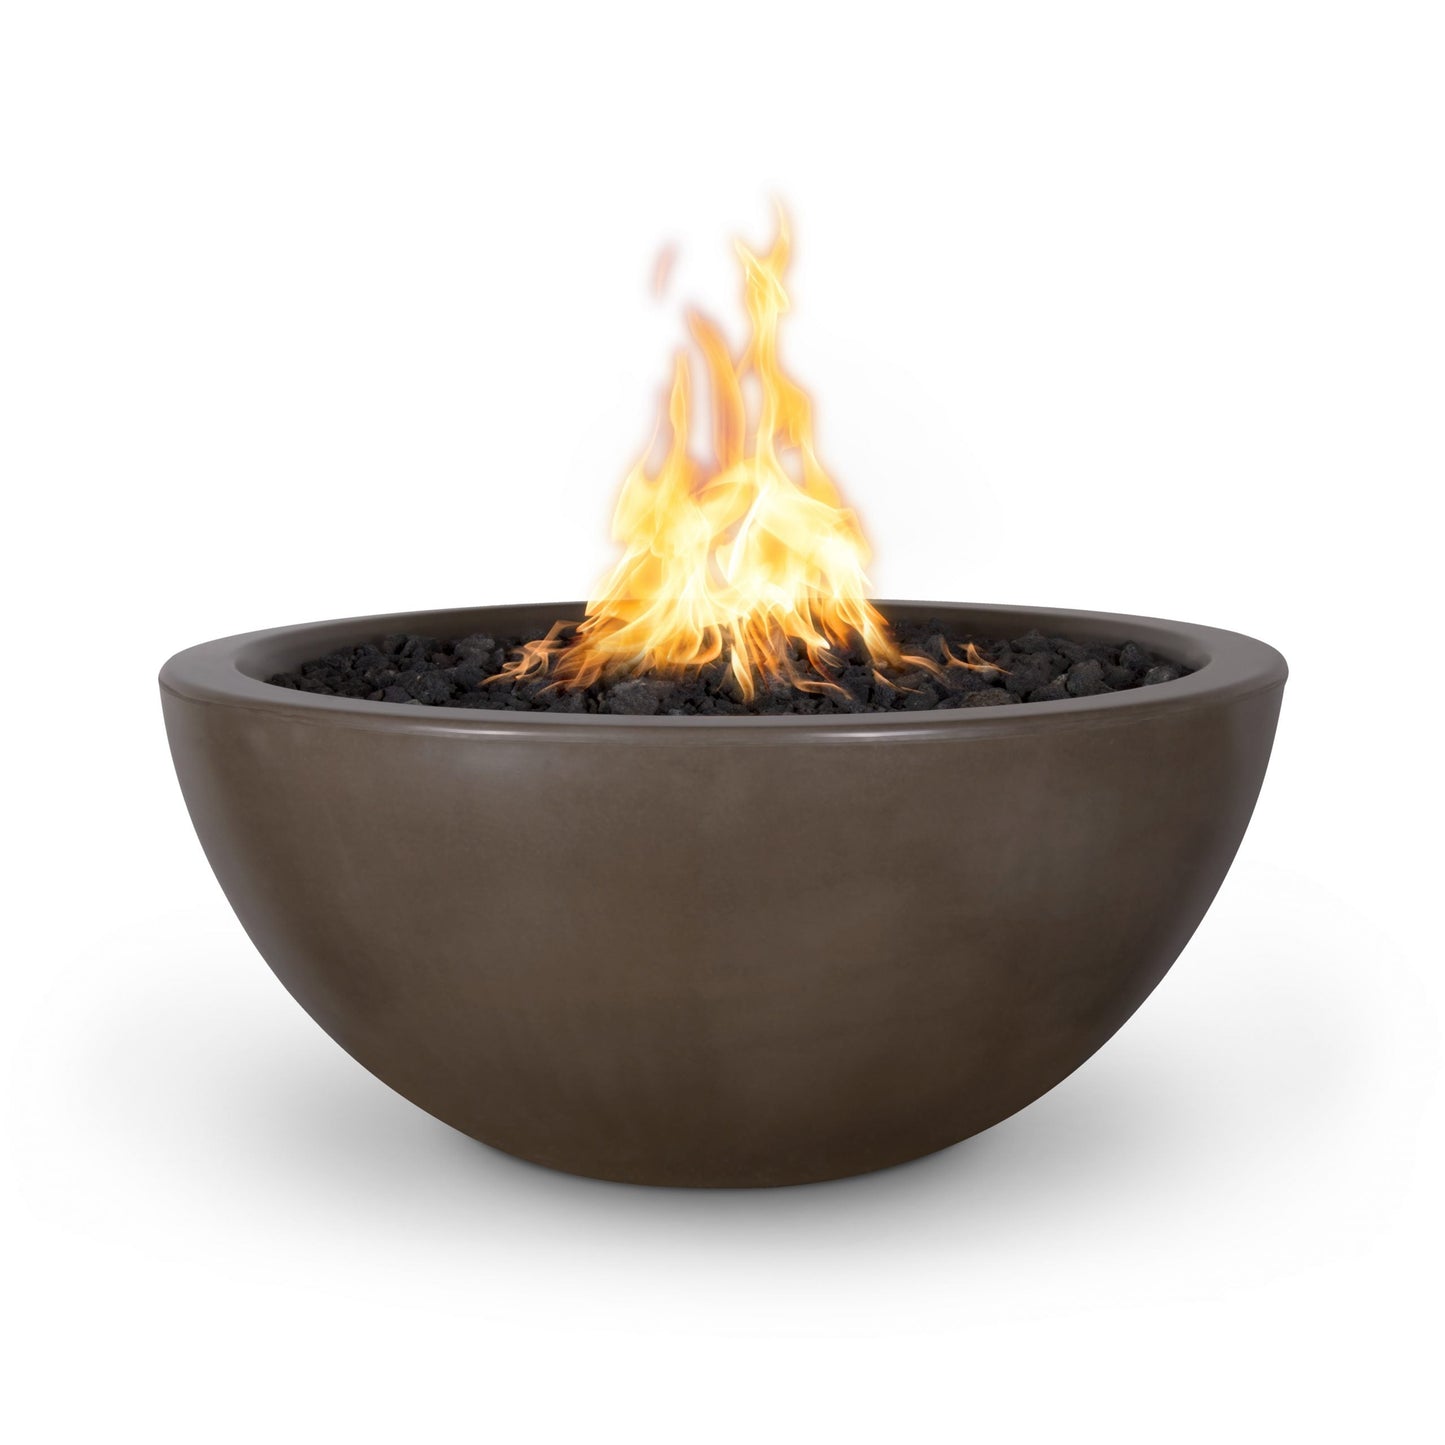 The Outdoor Plus Round Luna 30" Brown GFRC Concrete Natural Gas Fire Bowl with Match Lit with Flame Sense Ignition